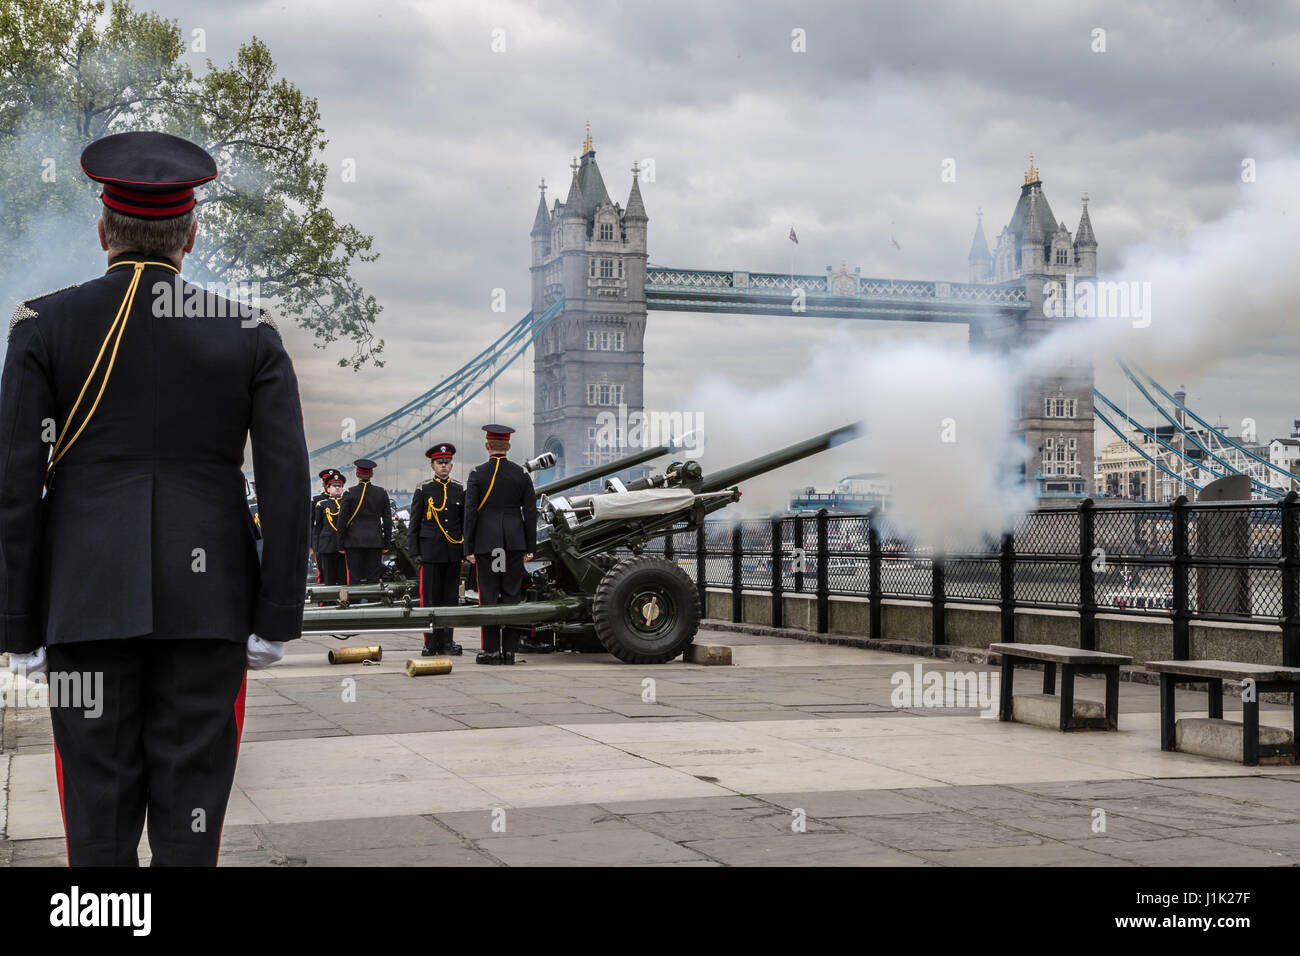 London, UK. 21st April, 2017. 62-gun salute fired by the Honourable Artillery Company at the Tower of London on the occasion of The Queen’s 91st birthday. Credit: Guy Corbishley/Alamy Live News Stock Photo